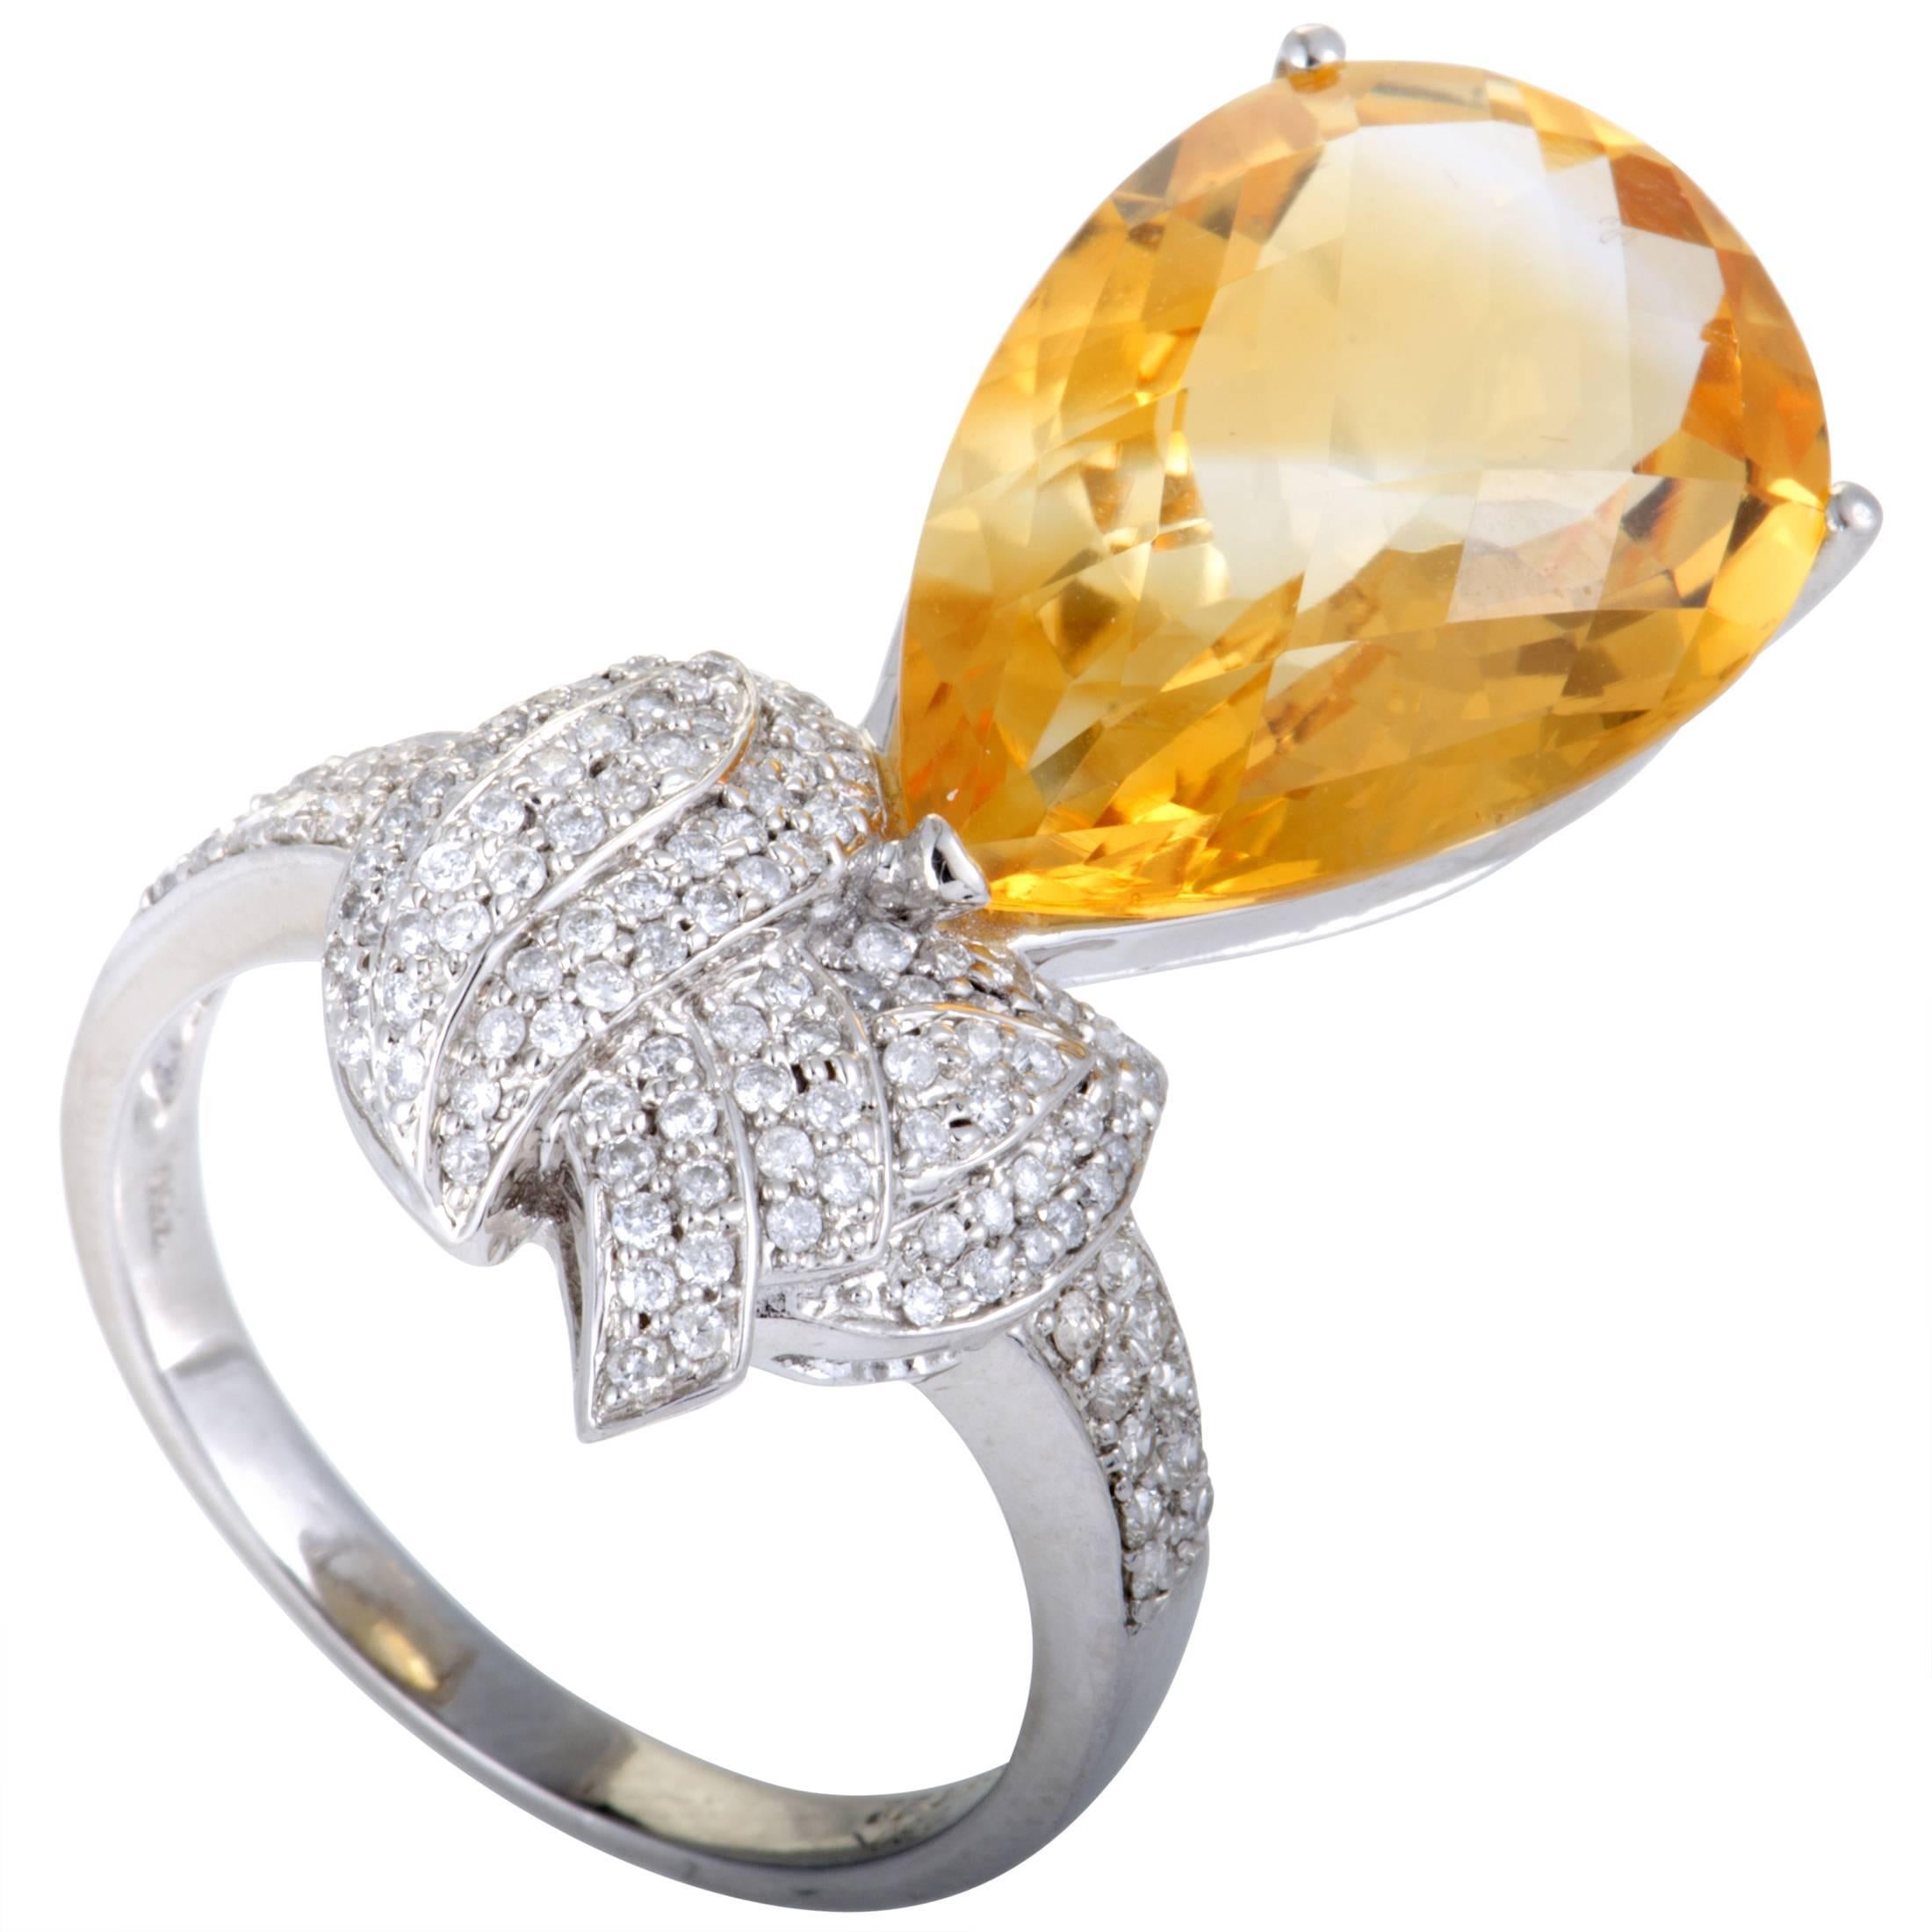 The alluring citrine adds an eye-catching pop of color to this splendid ring that boasts a stunningly offbeat design and lavish décor. The ring is made of 18K white gold and set with a total of 0.60 carats of diamonds, while the citrine stone weighs